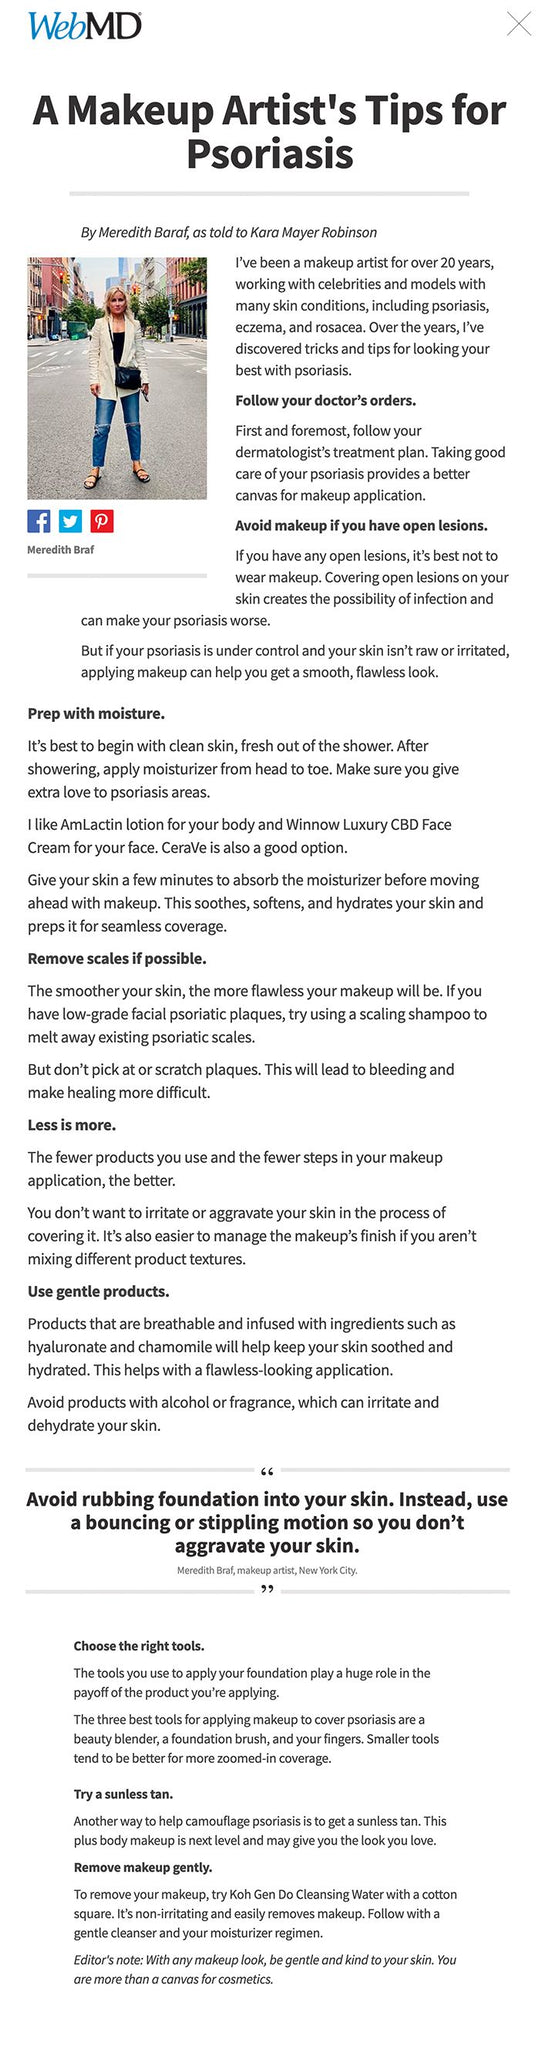 A Makeup Artist's Tips for Psoriasis Share on Facebook Share on Twitter Share on Pinterest Save Email Print By Meredith Baraf, as told to Kara Mayer Robinson   Share on Facebook Share on Twitter Share on Pinterest Meredith Braf I’ve been a makeup artist for over 20 years, working with celebrities and models with many skin conditions, including psoriasis, eczema, and rosacea. Over the years, I’ve discovered tricks and tips for looking your best with psoriasis.  Follow your doctor’s orders.  First and foremost, follow your dermatologist’s treatment plan. Taking good care of your psoriasis provides a better canvas for makeup application.  Avoid makeup if you have open lesions.  If you have any open lesions, it’s best not to wear makeup. Covering open lesions on your skin creates the possibility of infection and can make your psoriasis worse.  But if your psoriasis is under control and your skin isn’t raw or irritated, applying makeup can help you get a smooth, flawless look.  Prep with moisture.  It’s best to begin with clean skin, fresh out of the shower. After showering, apply moisturizer from head to toe. Make sure you give extra love to psoriasis areas.  I like AmLactin lotion for your body and Winnow Luxury CBD Face Cream for your face. CeraVe is also a good option.  Give your skin a few minutes to absorb the moisturizer before moving ahead with makeup. This soothes, softens, and hydrates your skin and preps it for seamless coverage.  Remove scales if possible.  The smoother your skin, the more flawless your makeup will be. If you have low-grade facial psoriatic plaques, try using a scaling shampoo to melt away existing psoriatic scales.  But don’t pick at or scratch plaques. This will lead to bleeding and make healing more difficult.  Less is more.  The fewer products you use and the fewer steps in your makeup application, the better.  You don’t want to irritate or aggravate your skin in the process of covering it. It’s also easier to manage the makeup’s finish if you aren’t mixing different product textures.  Use gentle products.  Products that are breathable and infused with ingredients such as hyaluronate and chamomile will help keep your skin soothed and hydrated. This helps with a flawless-looking application.  Avoid products with alcohol or fragrance, which can irritate and dehydrate your skin.  Avoid rubbing foundation into your skin. Instead, use a bouncing or stippling motion so you don’t aggravate your skin. Meredith Braf, makeup artist, New York City.    Choose the right tools.  The tools you use to apply your foundation play a huge role in the payoff of the product you’re applying.  The three best tools for applying makeup to cover psoriasis are a beauty blender, a foundation brush, and your fingers. Smaller tools tend to be better for more zoomed-in coverage.  Bounce, don’t rub.  Be extra careful with application techniques. Avoid rubbing foundation into your skin. Instead, use a bouncing or stippling motion so you don’t aggravate your skin while applying it.  Be patient.  Rough patches and discoloration can be a bit tricky to cover. Build in extra time for covering them. The last thing you need is to be rushing, which causes stress, and stress isn’t helpful for psoriasis.  Build up your foundation in layers.  When applying foundation, the first step is to apply it all over, using thin layers to build up to your desired coverage.  Next, go back with the same foundation to apply more density to areas that need more coverage. Use the right tool for this: It could be your finger, a small foundation or concealer brush, or the pointy side of a beauty blender.  Lay the product down in those areas and then buff any edges.  Choose a buildable foundation.  Since less texture-mixing is best, I tend to choose a foundation that can be buildable, like Shiseido Synchro Skin Self-Refreshing Foundation, Dior Backstage Face and Body Foundation, or It Cosmetics CC+ Cream. I also love the Skin Twin Featherweight Foundation from Beautycounter, which is infused with hyaluronic acid and is fragrance-free.  With the right foundation, you can skip concealer.  Since less is more, I prefer creating a good foundation instead of layering on extra products like concealer. Using a concealer shouldn’t be necessary unless you’re using a foundation that isn’t buildable.  If you do opt to use concealer, I would use one with a satin finish, like Glossier Stretch Concealer.  Finish with a light touch.  A light dusting of translucent powder like Face Atelier Ultra Loose Powder is good for setting your makeup.  Try body makeup.  Body makeup can cover your psoriasis and give you flawless-looking skin all over. Try a moisture-infused, full-coverage body makeup.  My two favorites are the Westmore Beauty Body Coverage Perfector and KKW Skin Perfecting Body Foundation and Body Brush. They cover and help blur imperfections without transferring to places you don’t want it.  When you apply body makeup, use long strokes. Then softly buff it out. I prefer a Body Buff brush, but you can also use your hands or a mitt. Allow it to dry.  Try a sunless tan.  Another way to help camouflage psoriasis is to get a sunless tan. This plus body makeup is next level and may give you the look you love.  Remove makeup gently.  To remove your makeup, try Koh Gen Do Cleansing Water with a cotton square. It’s non-irritating and easily removes makeup. Follow with a gentle cleanser and your moisturizer regimen.  Editor's note: With any makeup look, be gentle and kind to your skin. You are more than a canvas for cosmetics.